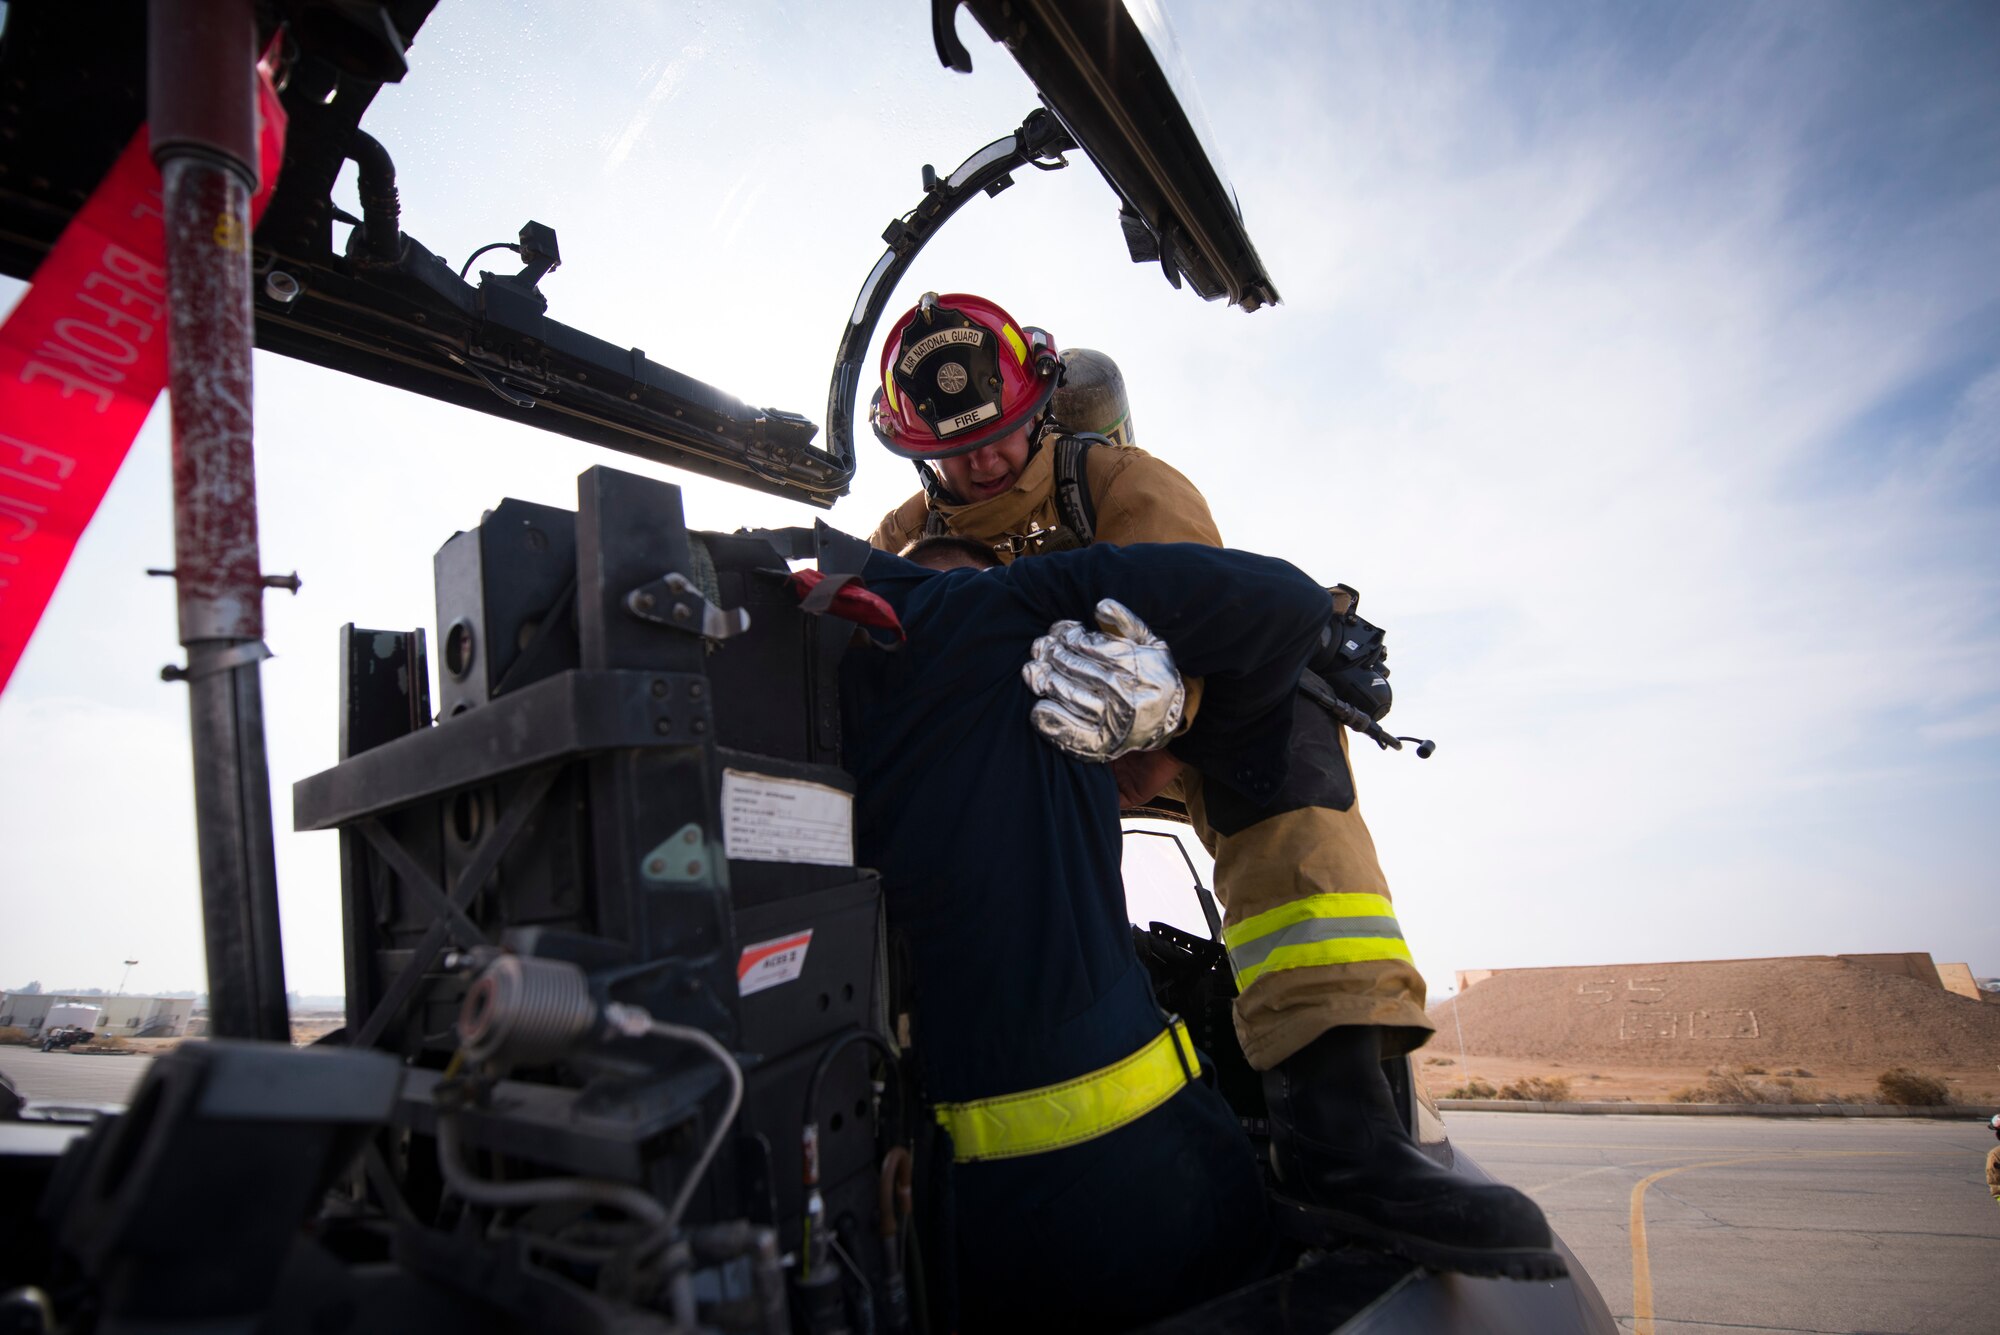 Tech Sgt. Kaleb Draper, a firefighter assigned to the 332d Expeditionary Civil Engineer Squadron, pulls a simulated casualty from the cockpit of an F-15E Strike Eagle during emergency egress training February 14, 2018 in Southwest Asia. The scenario involved a pilot who had become incapacitated and lost communication with air traffic control. (U.S. Air Force photo by Staff Sgt. Joshua Kleinholz)